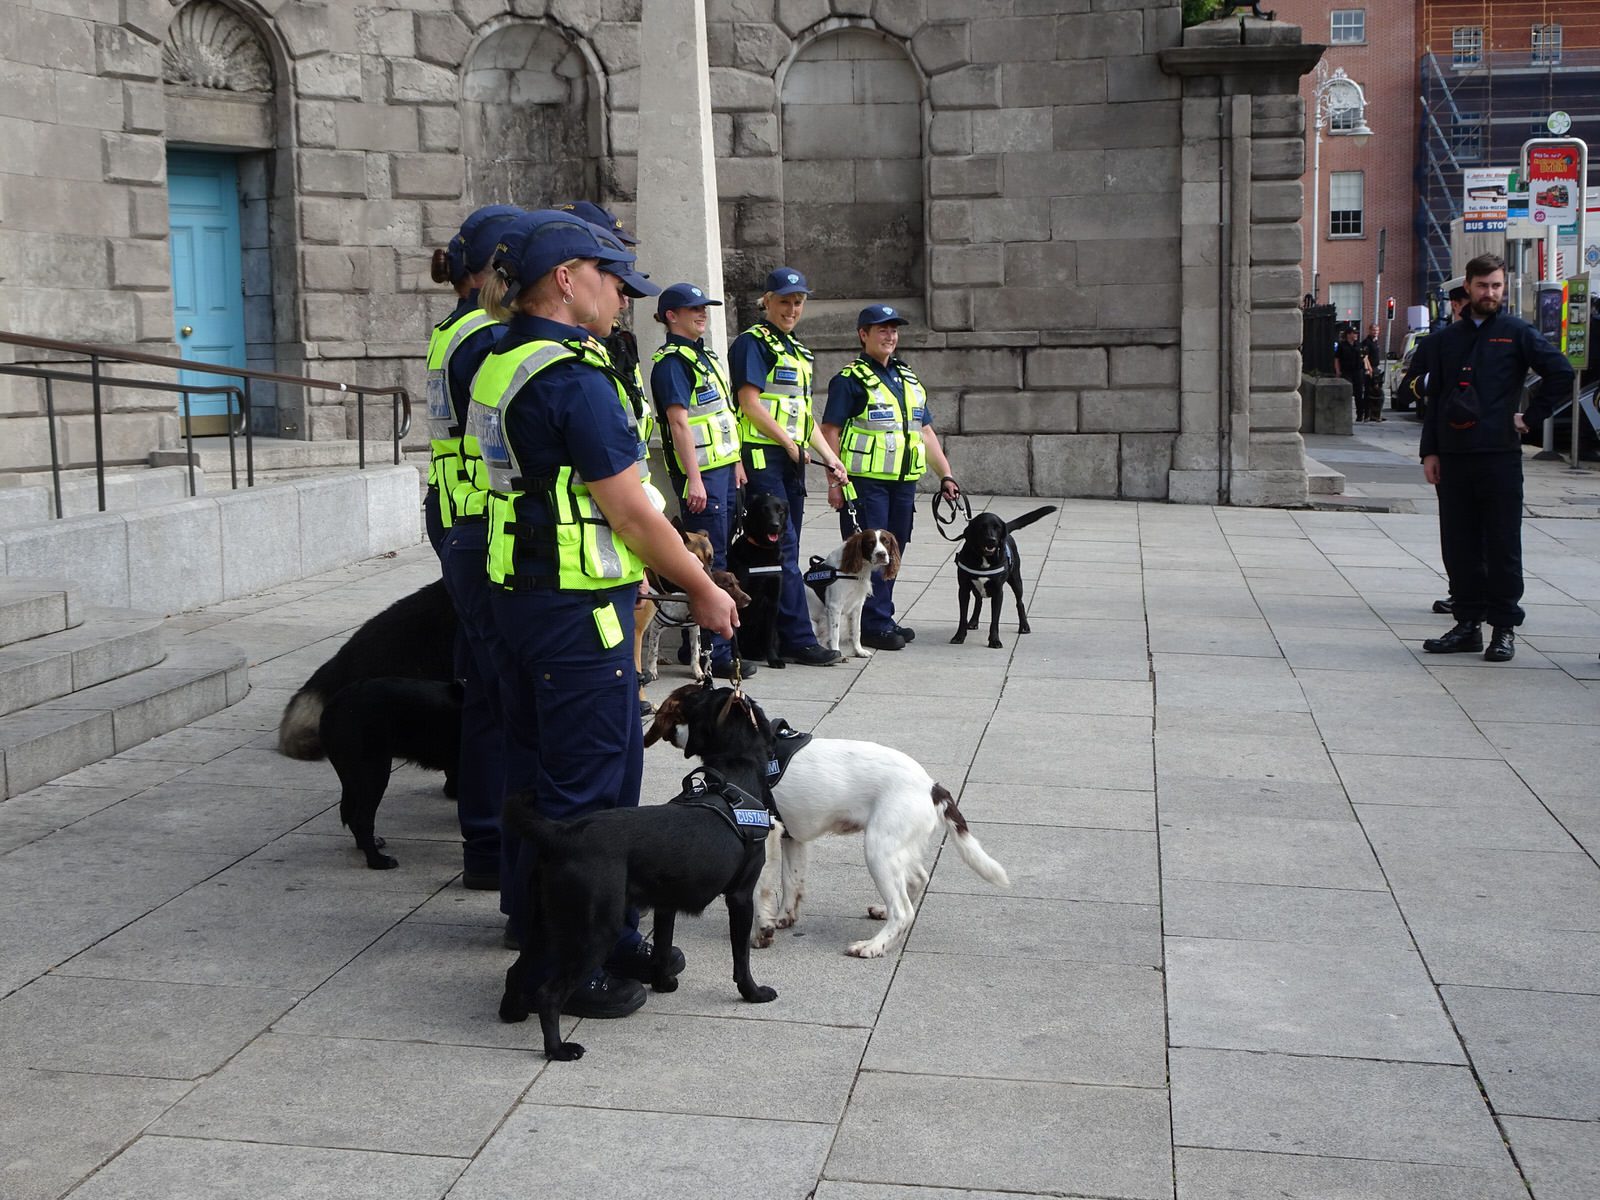 THE DOGS WHO WORK FOR THE IRISH CUSTOMS SERVICE [INVITED THE PRESS TO A PHOTO-SHOOT]-225741-1